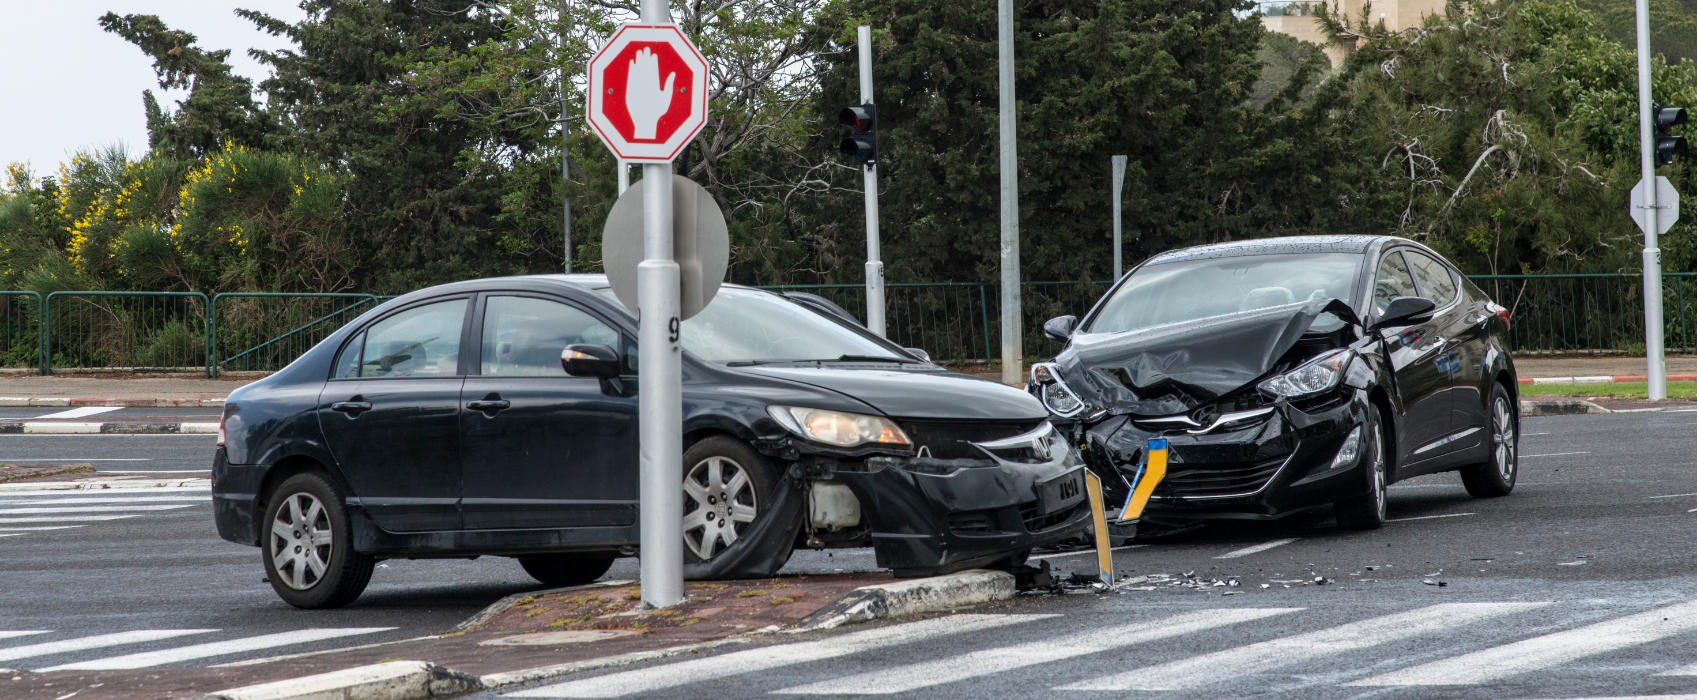 car accident at an intersection, Decatur car accident lawyers | Car accident attorneys in Decatur GA